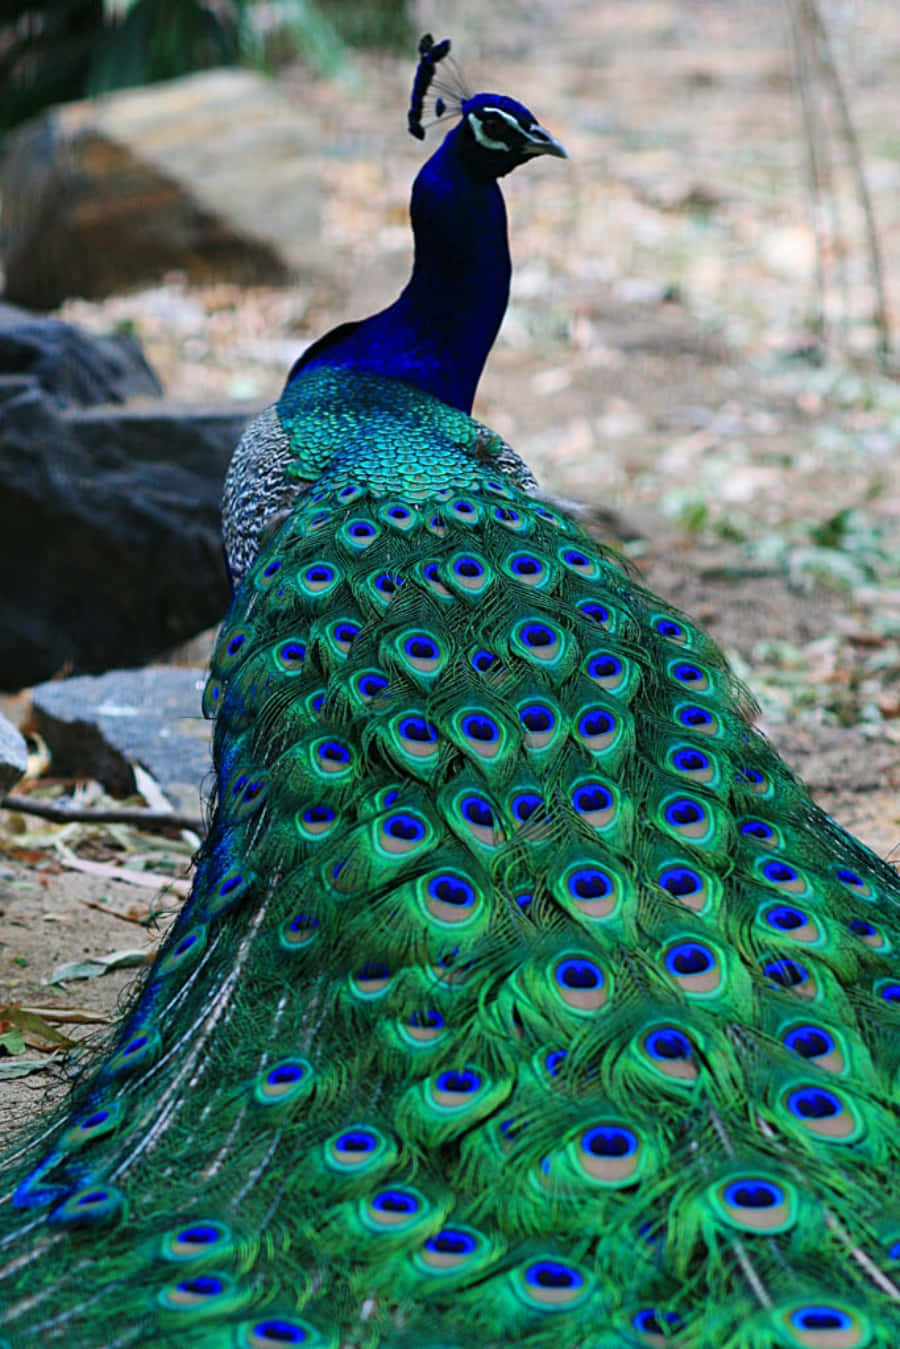 A Peacock With Feathers